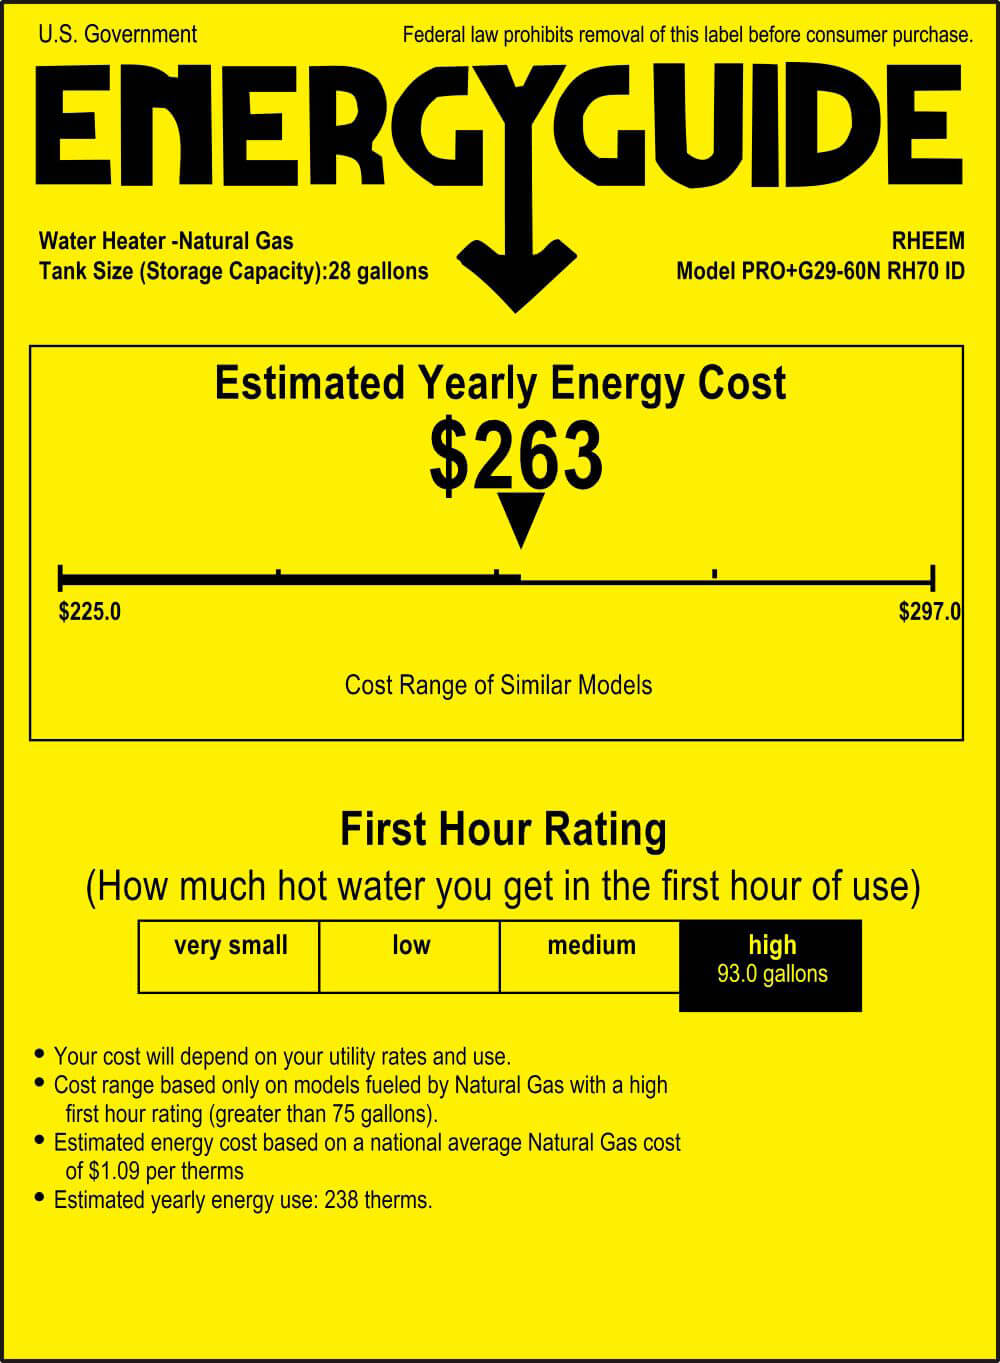 energy guide estimated yearly energy cost $263